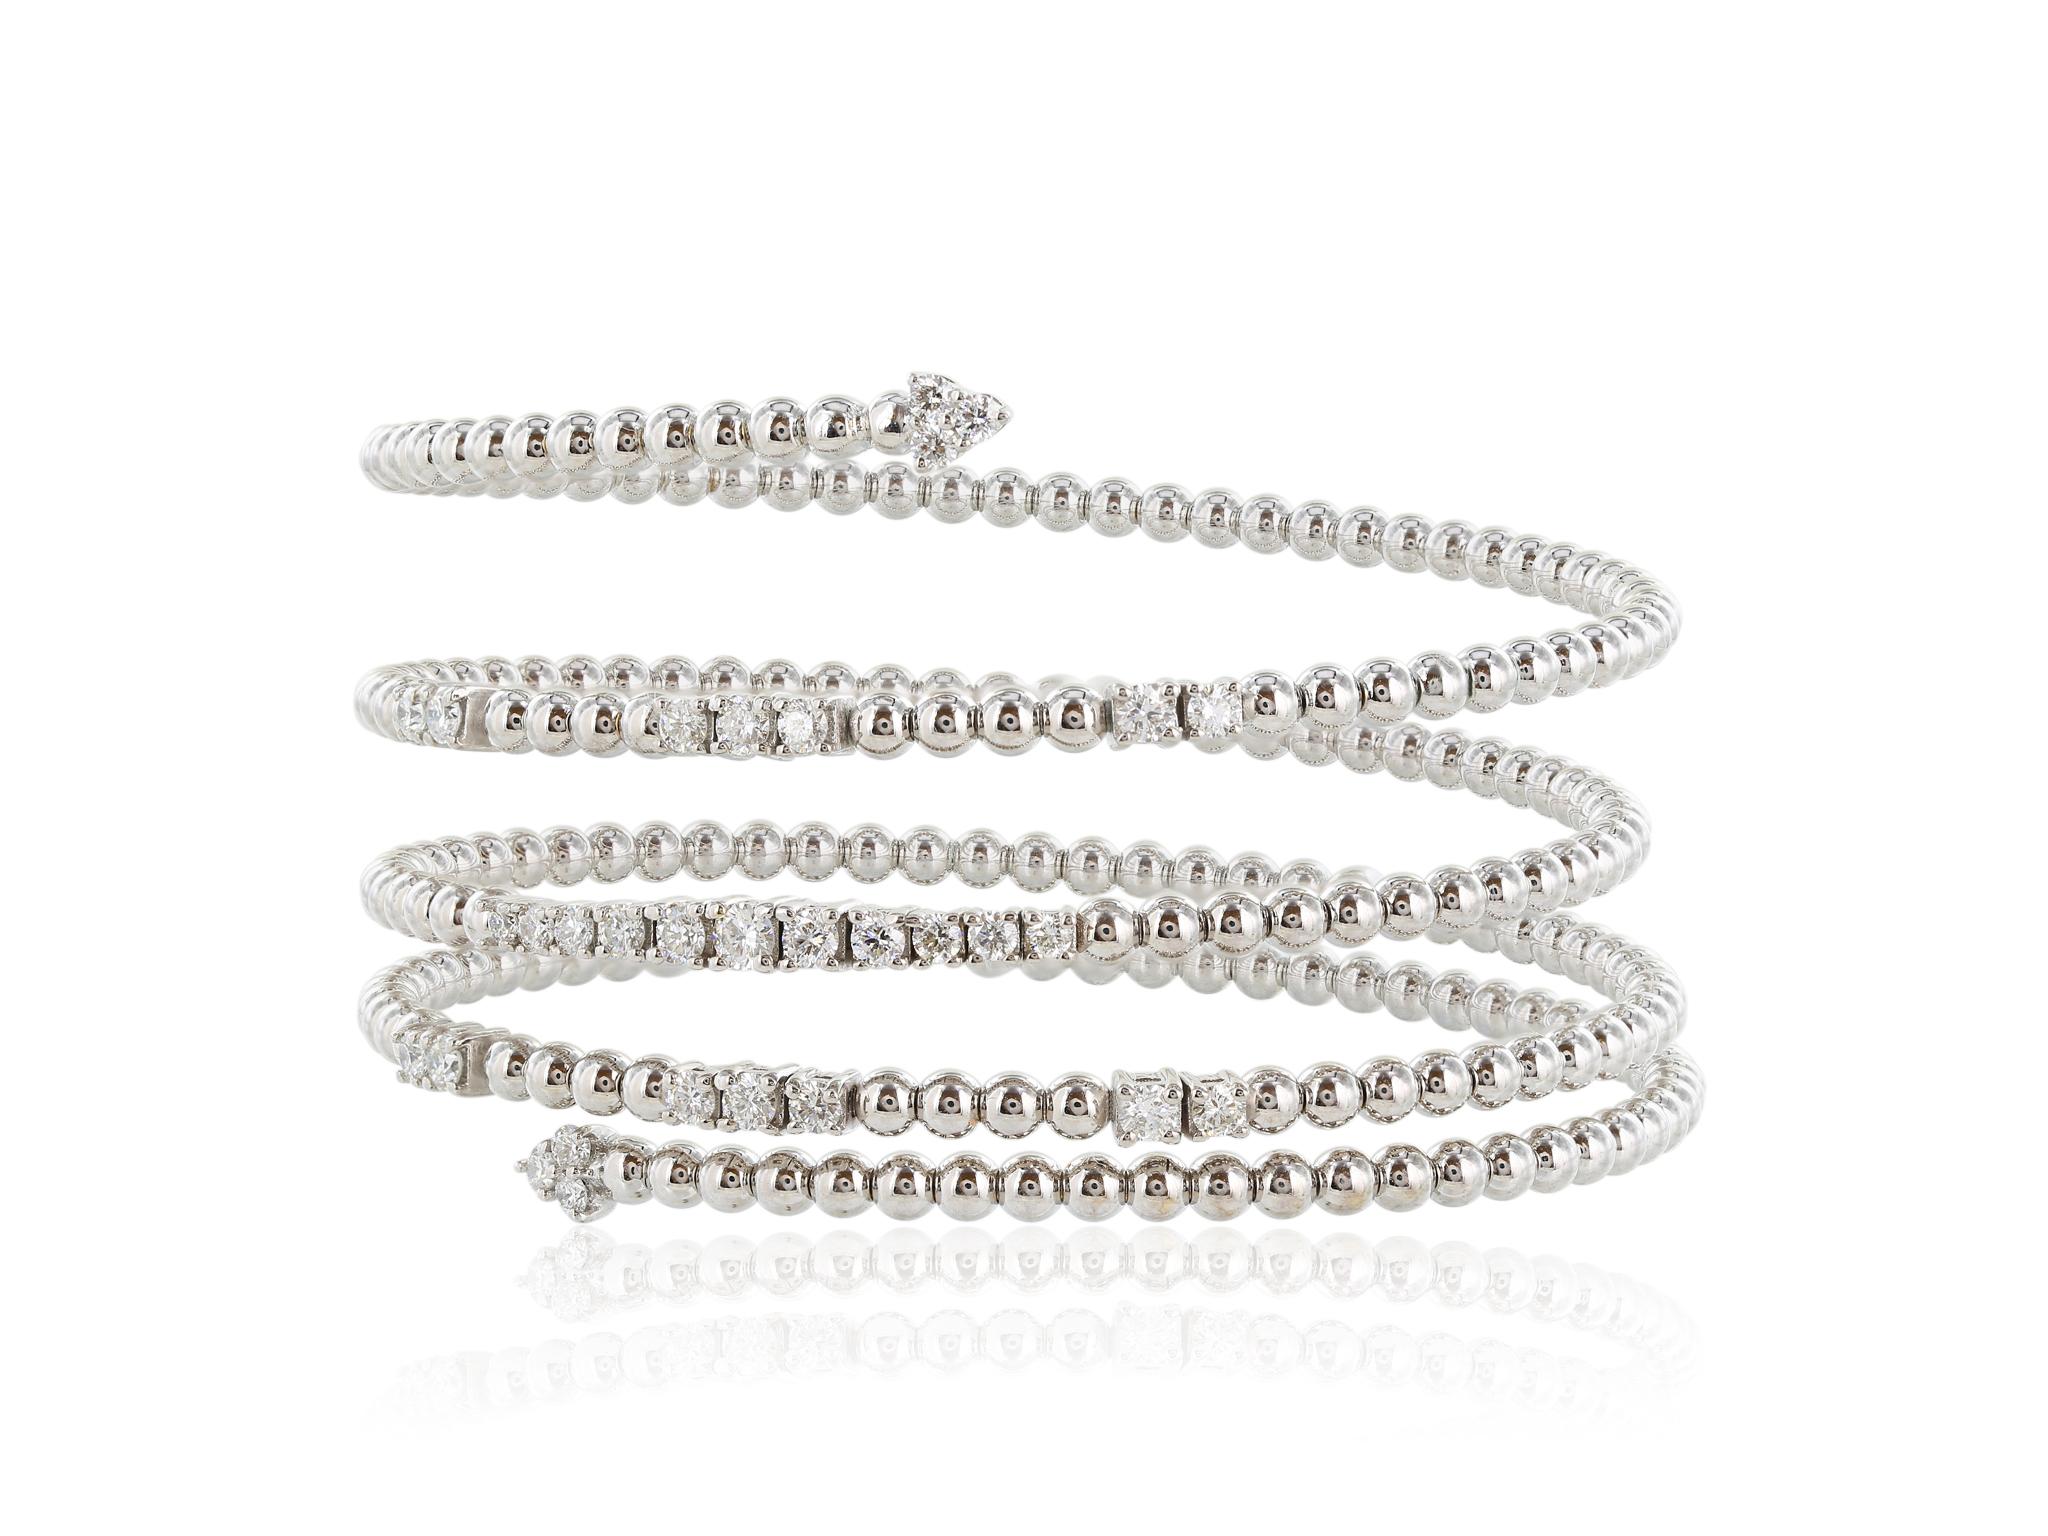 White gold wrap bracelet featuring 29 round brilliant cut diamonds that have a combined total carat weight of 1.57 carats with a color and clarity of G-H VS2-SI1 respectively. The bracelet features a bead chain styling.